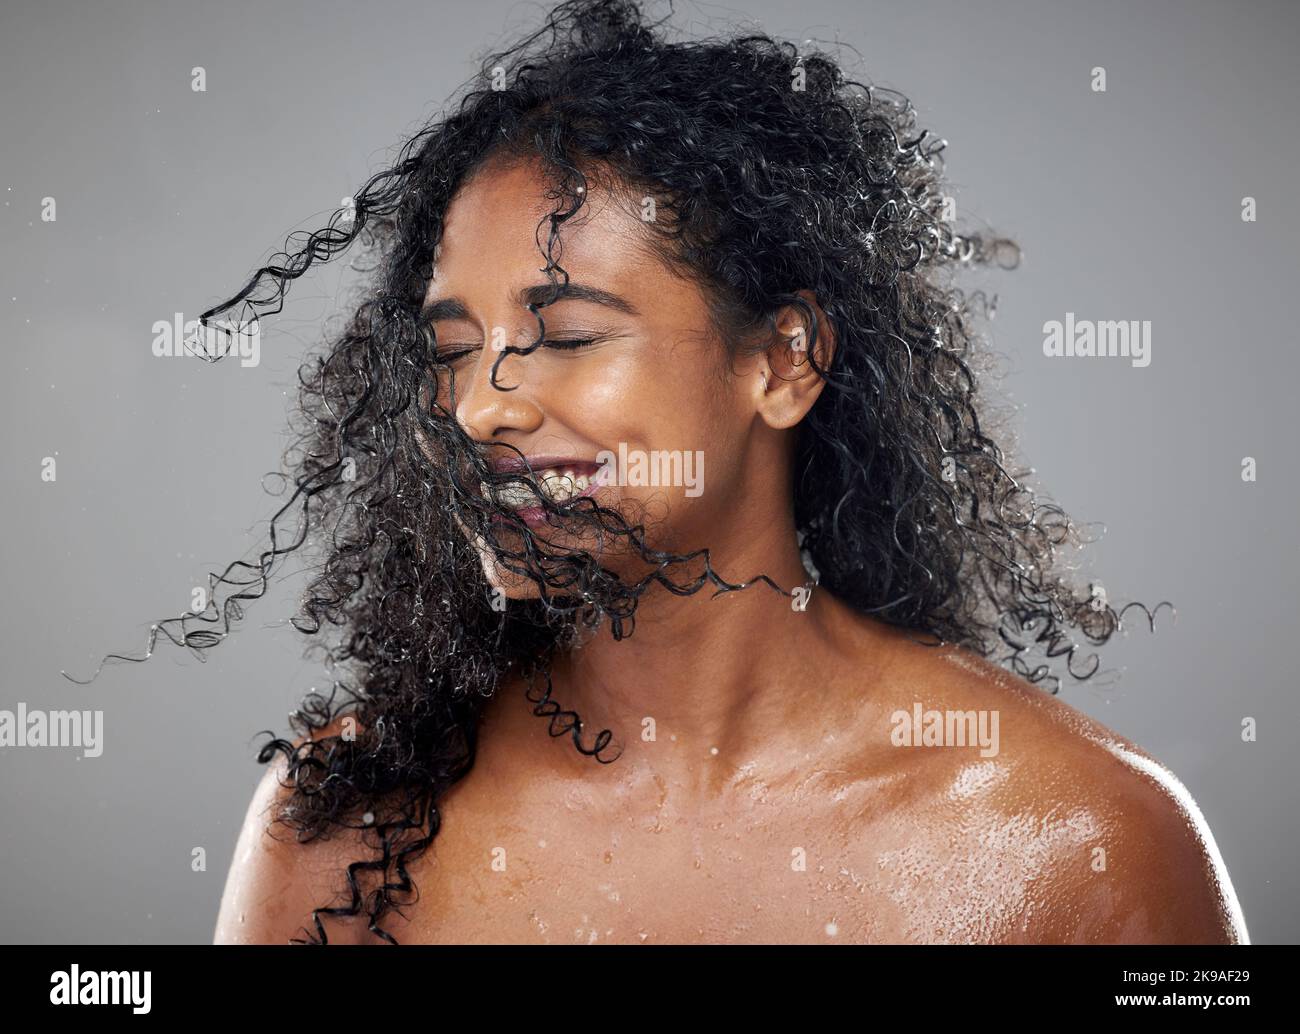 Healthy, wet hair and skincare beauty of a black woman with cosmetics product mockup to hydrate, nourish and moisturize African hair. Clean skin Stock Photo